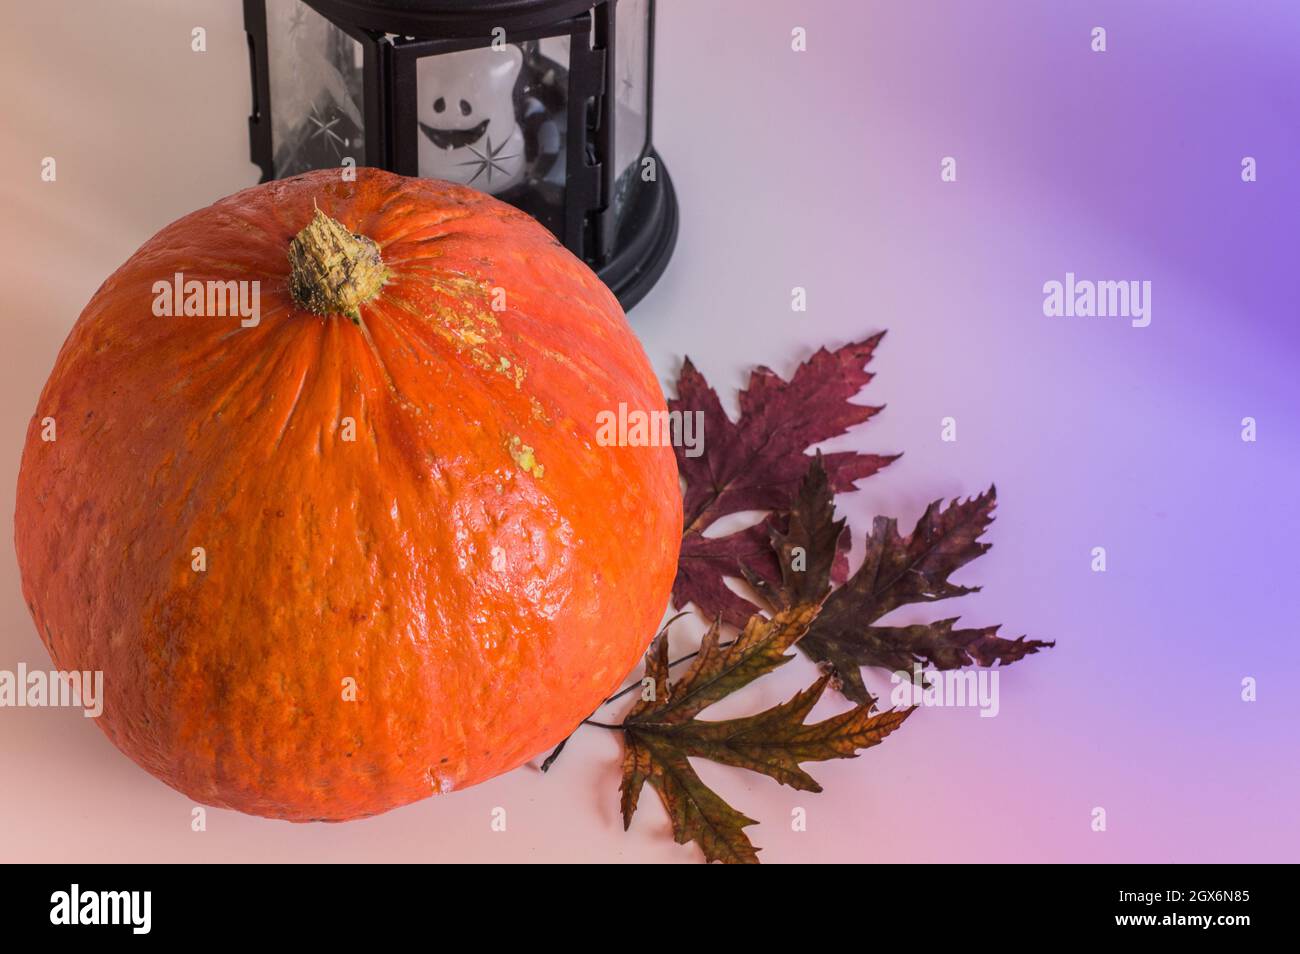 fresh orange pumpkin with autumn leaves on a light background Stock Photo